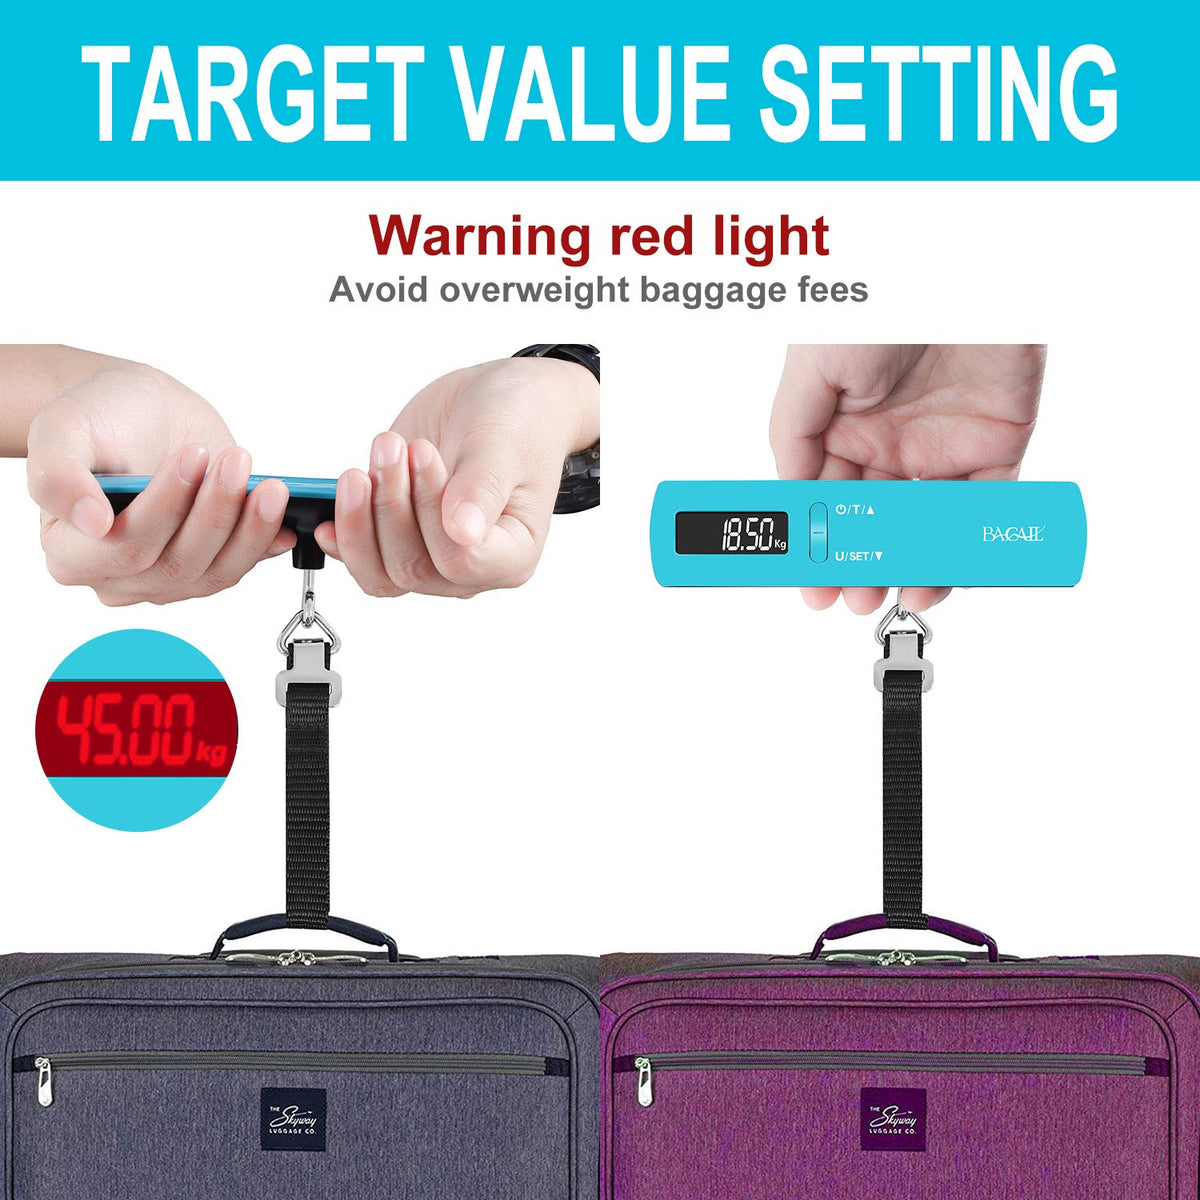 Bagail Electronic Luggage Scale Smart Travel Weight To Go